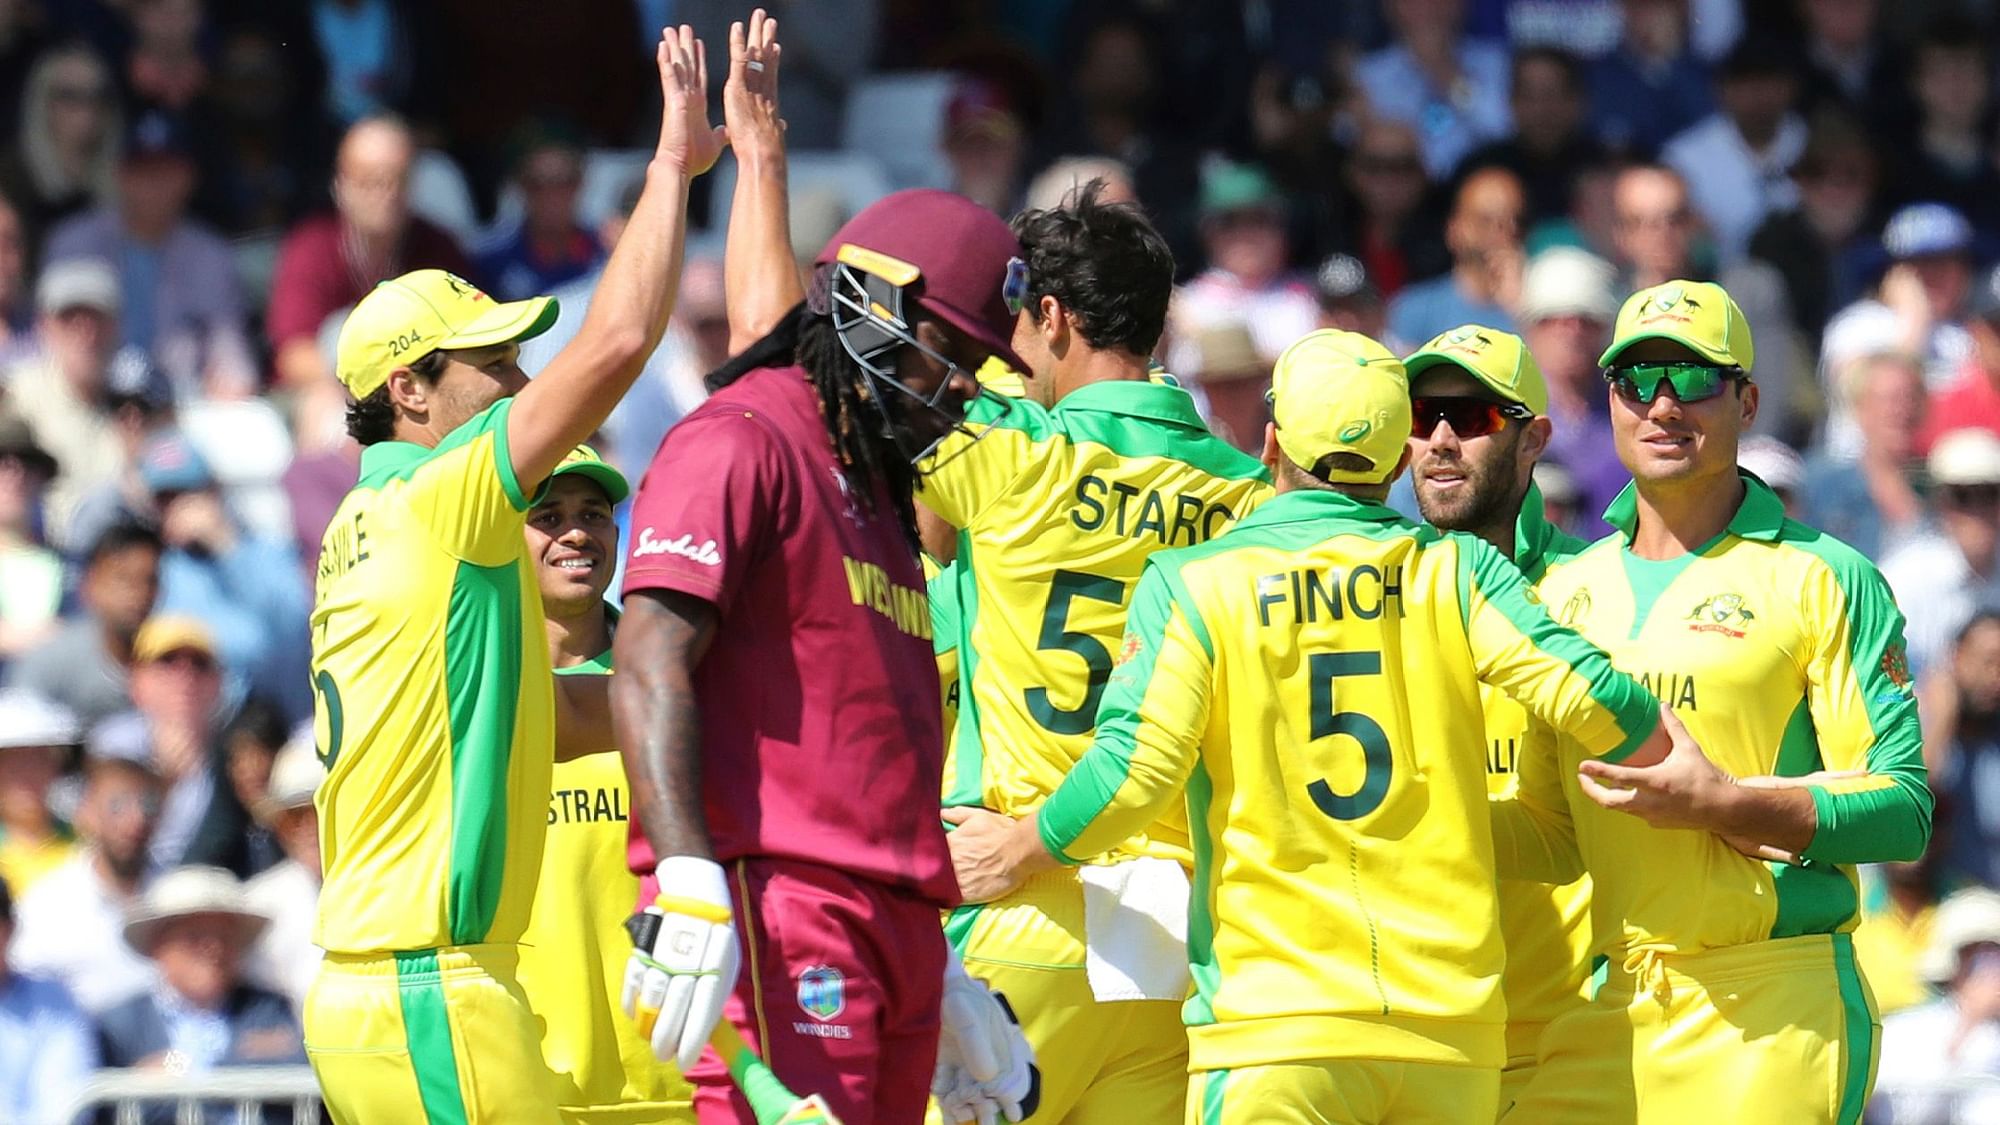 In the match against Australia, Chris Gayle was given out on what should have been a free hit.